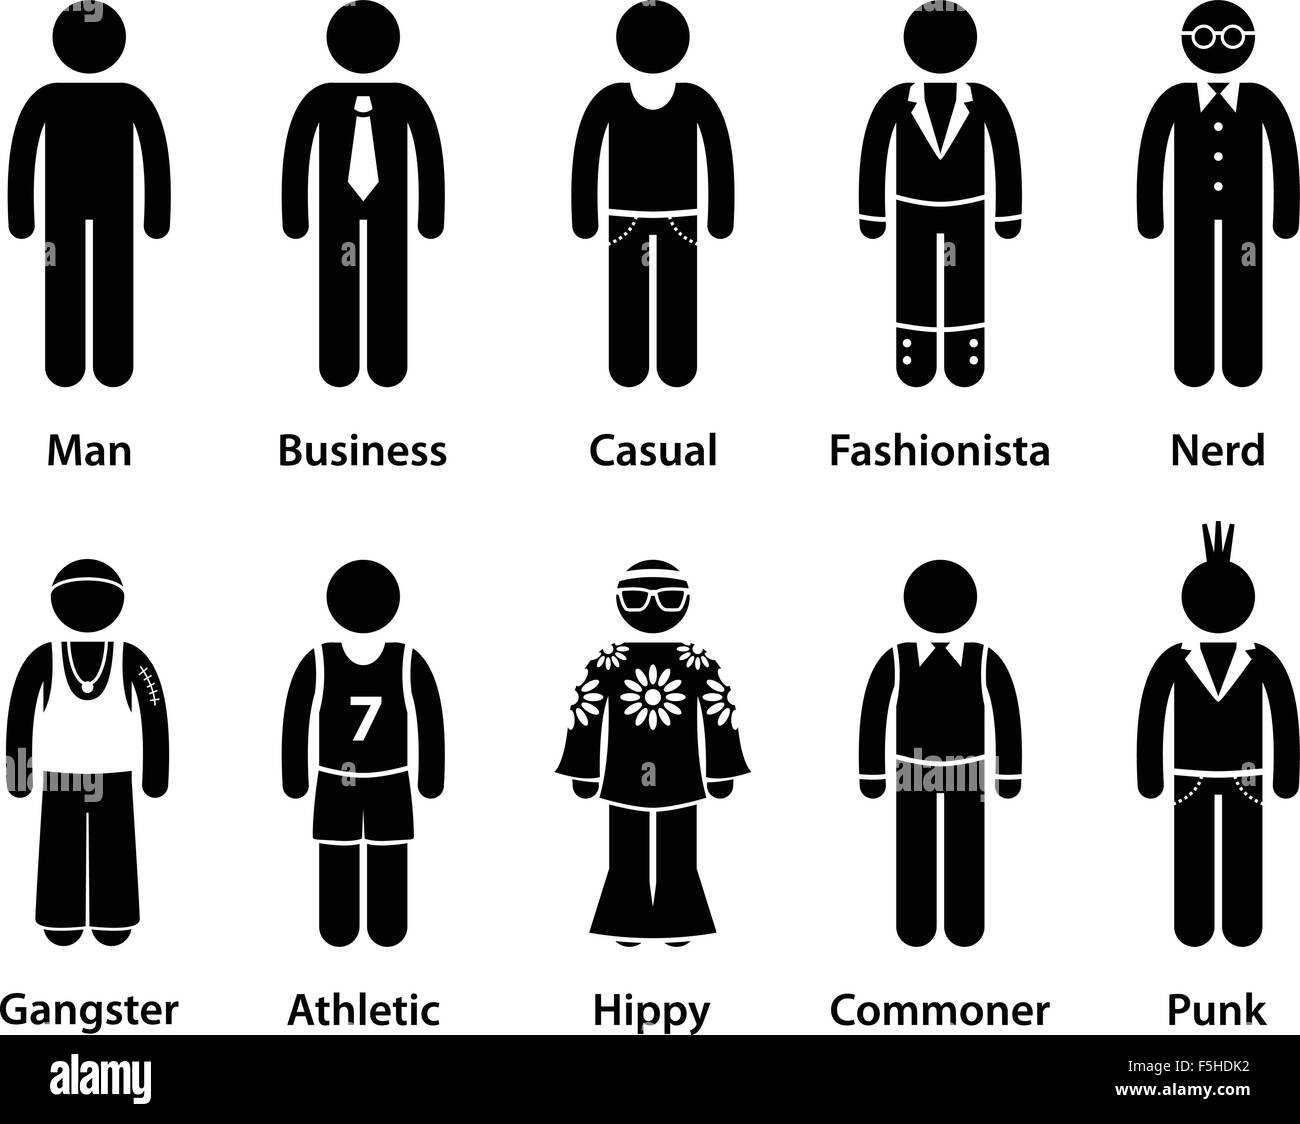 People Man Human Character Type Stick Figure Pictogram Icon Stock ...